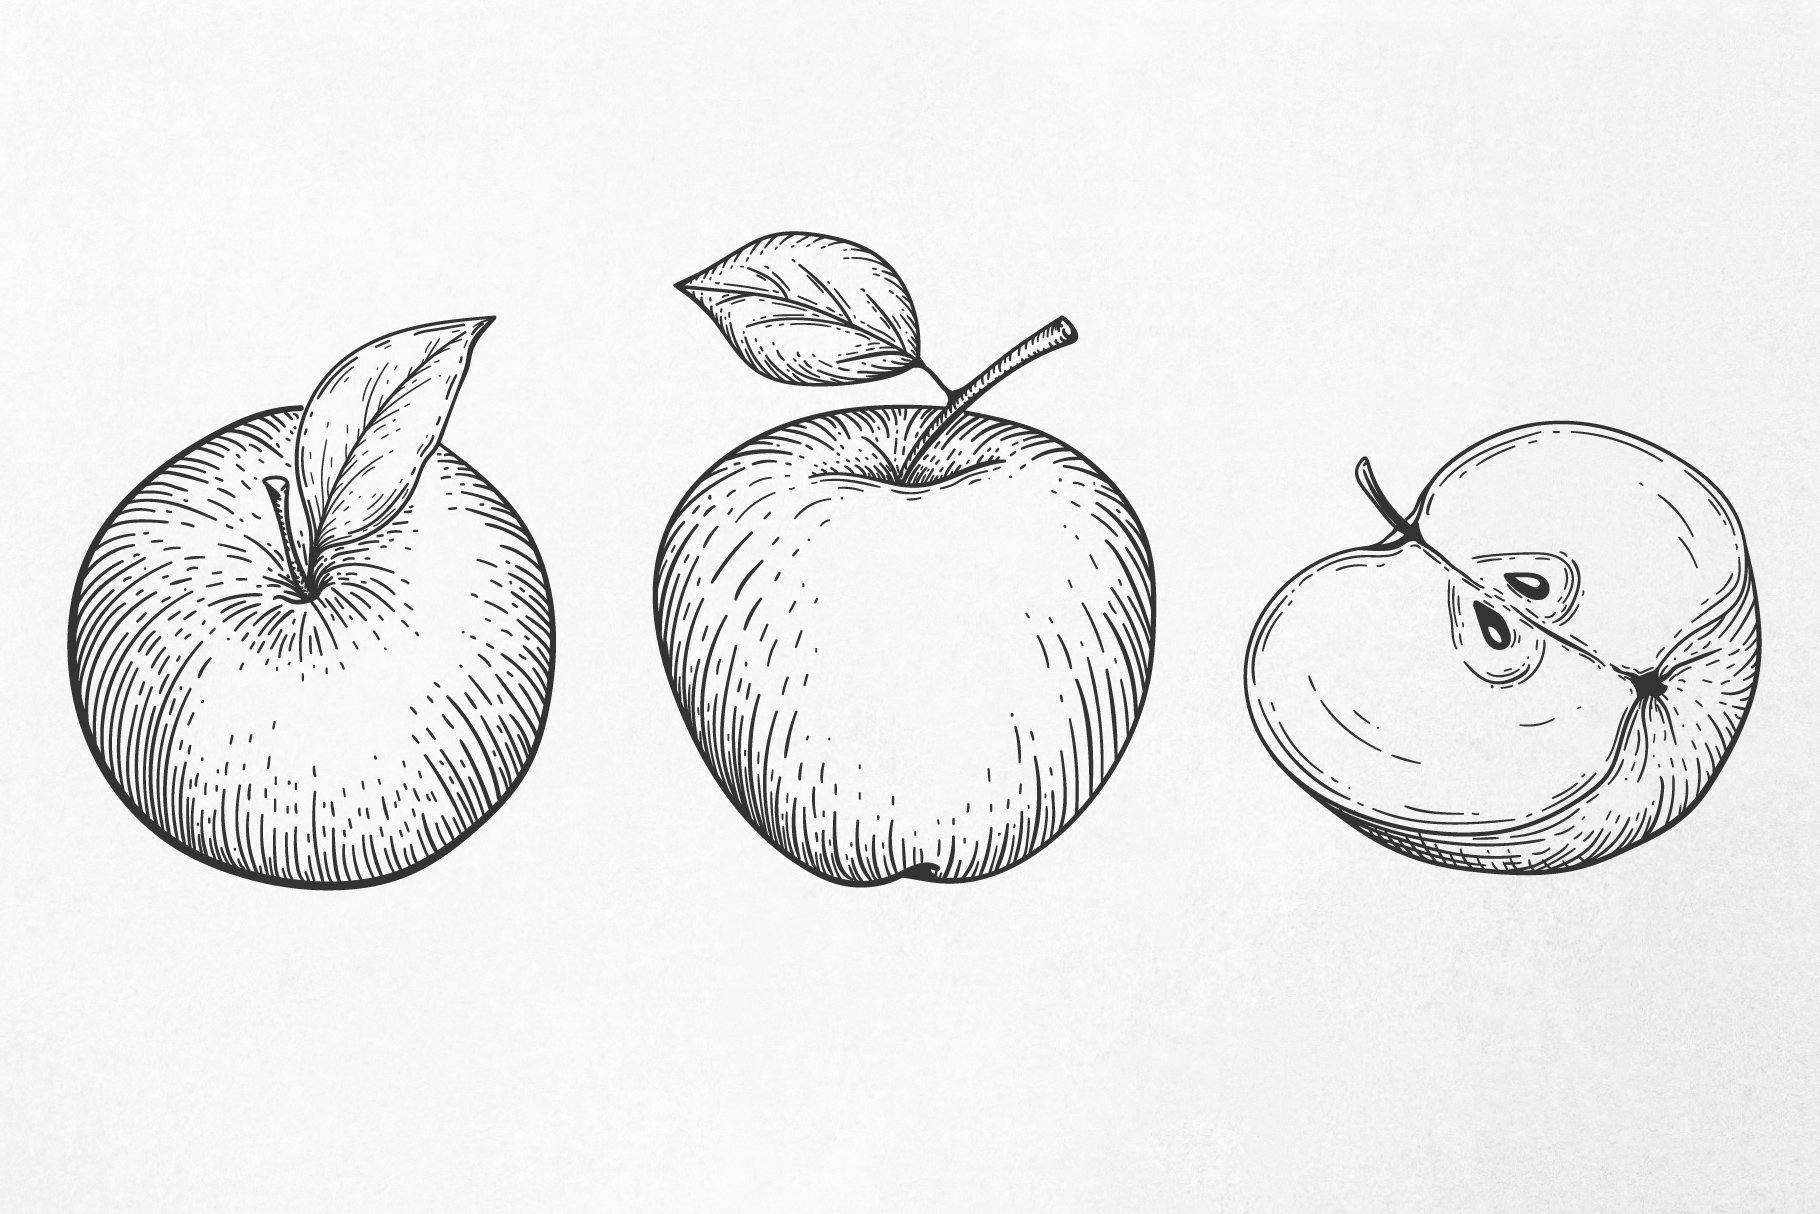 Pears drawing in pencil | fruit drawing | pencil sketch for beginners -  YouTube